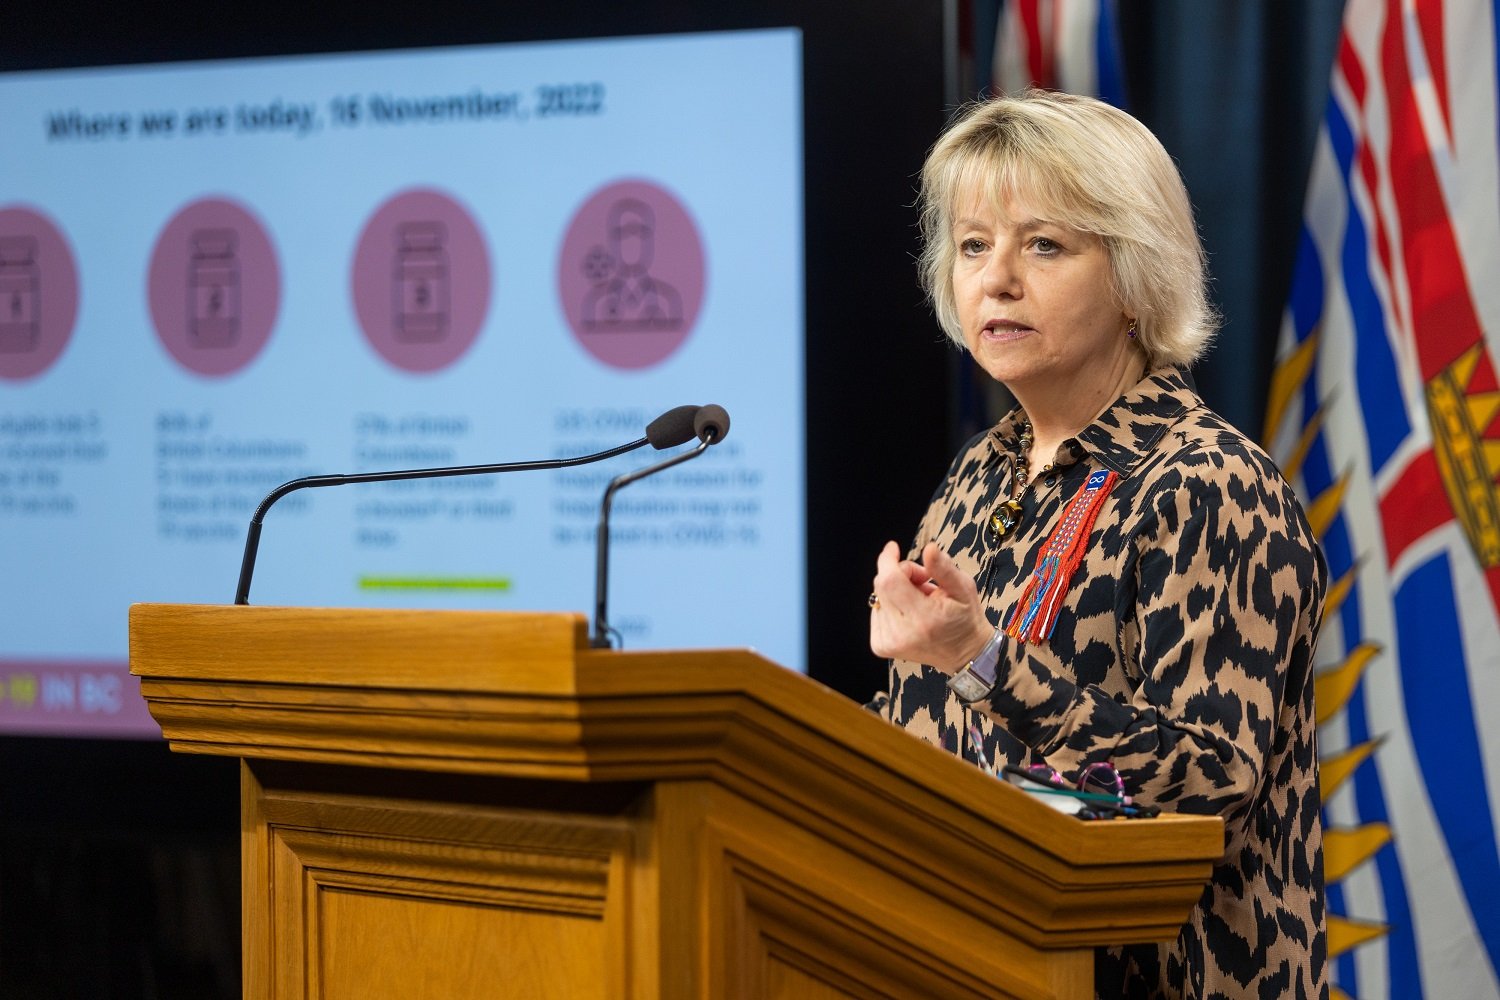 A woman with short blonde hair and a leopard-print button-down shirt stands at a wooden podium behind a pair of microphones. She is standing to the right of the frame in front of red, white and blue British Columbia flags. Behind her is a PowerPoint slide containing an infographic with light red and white colours conveying public health information.